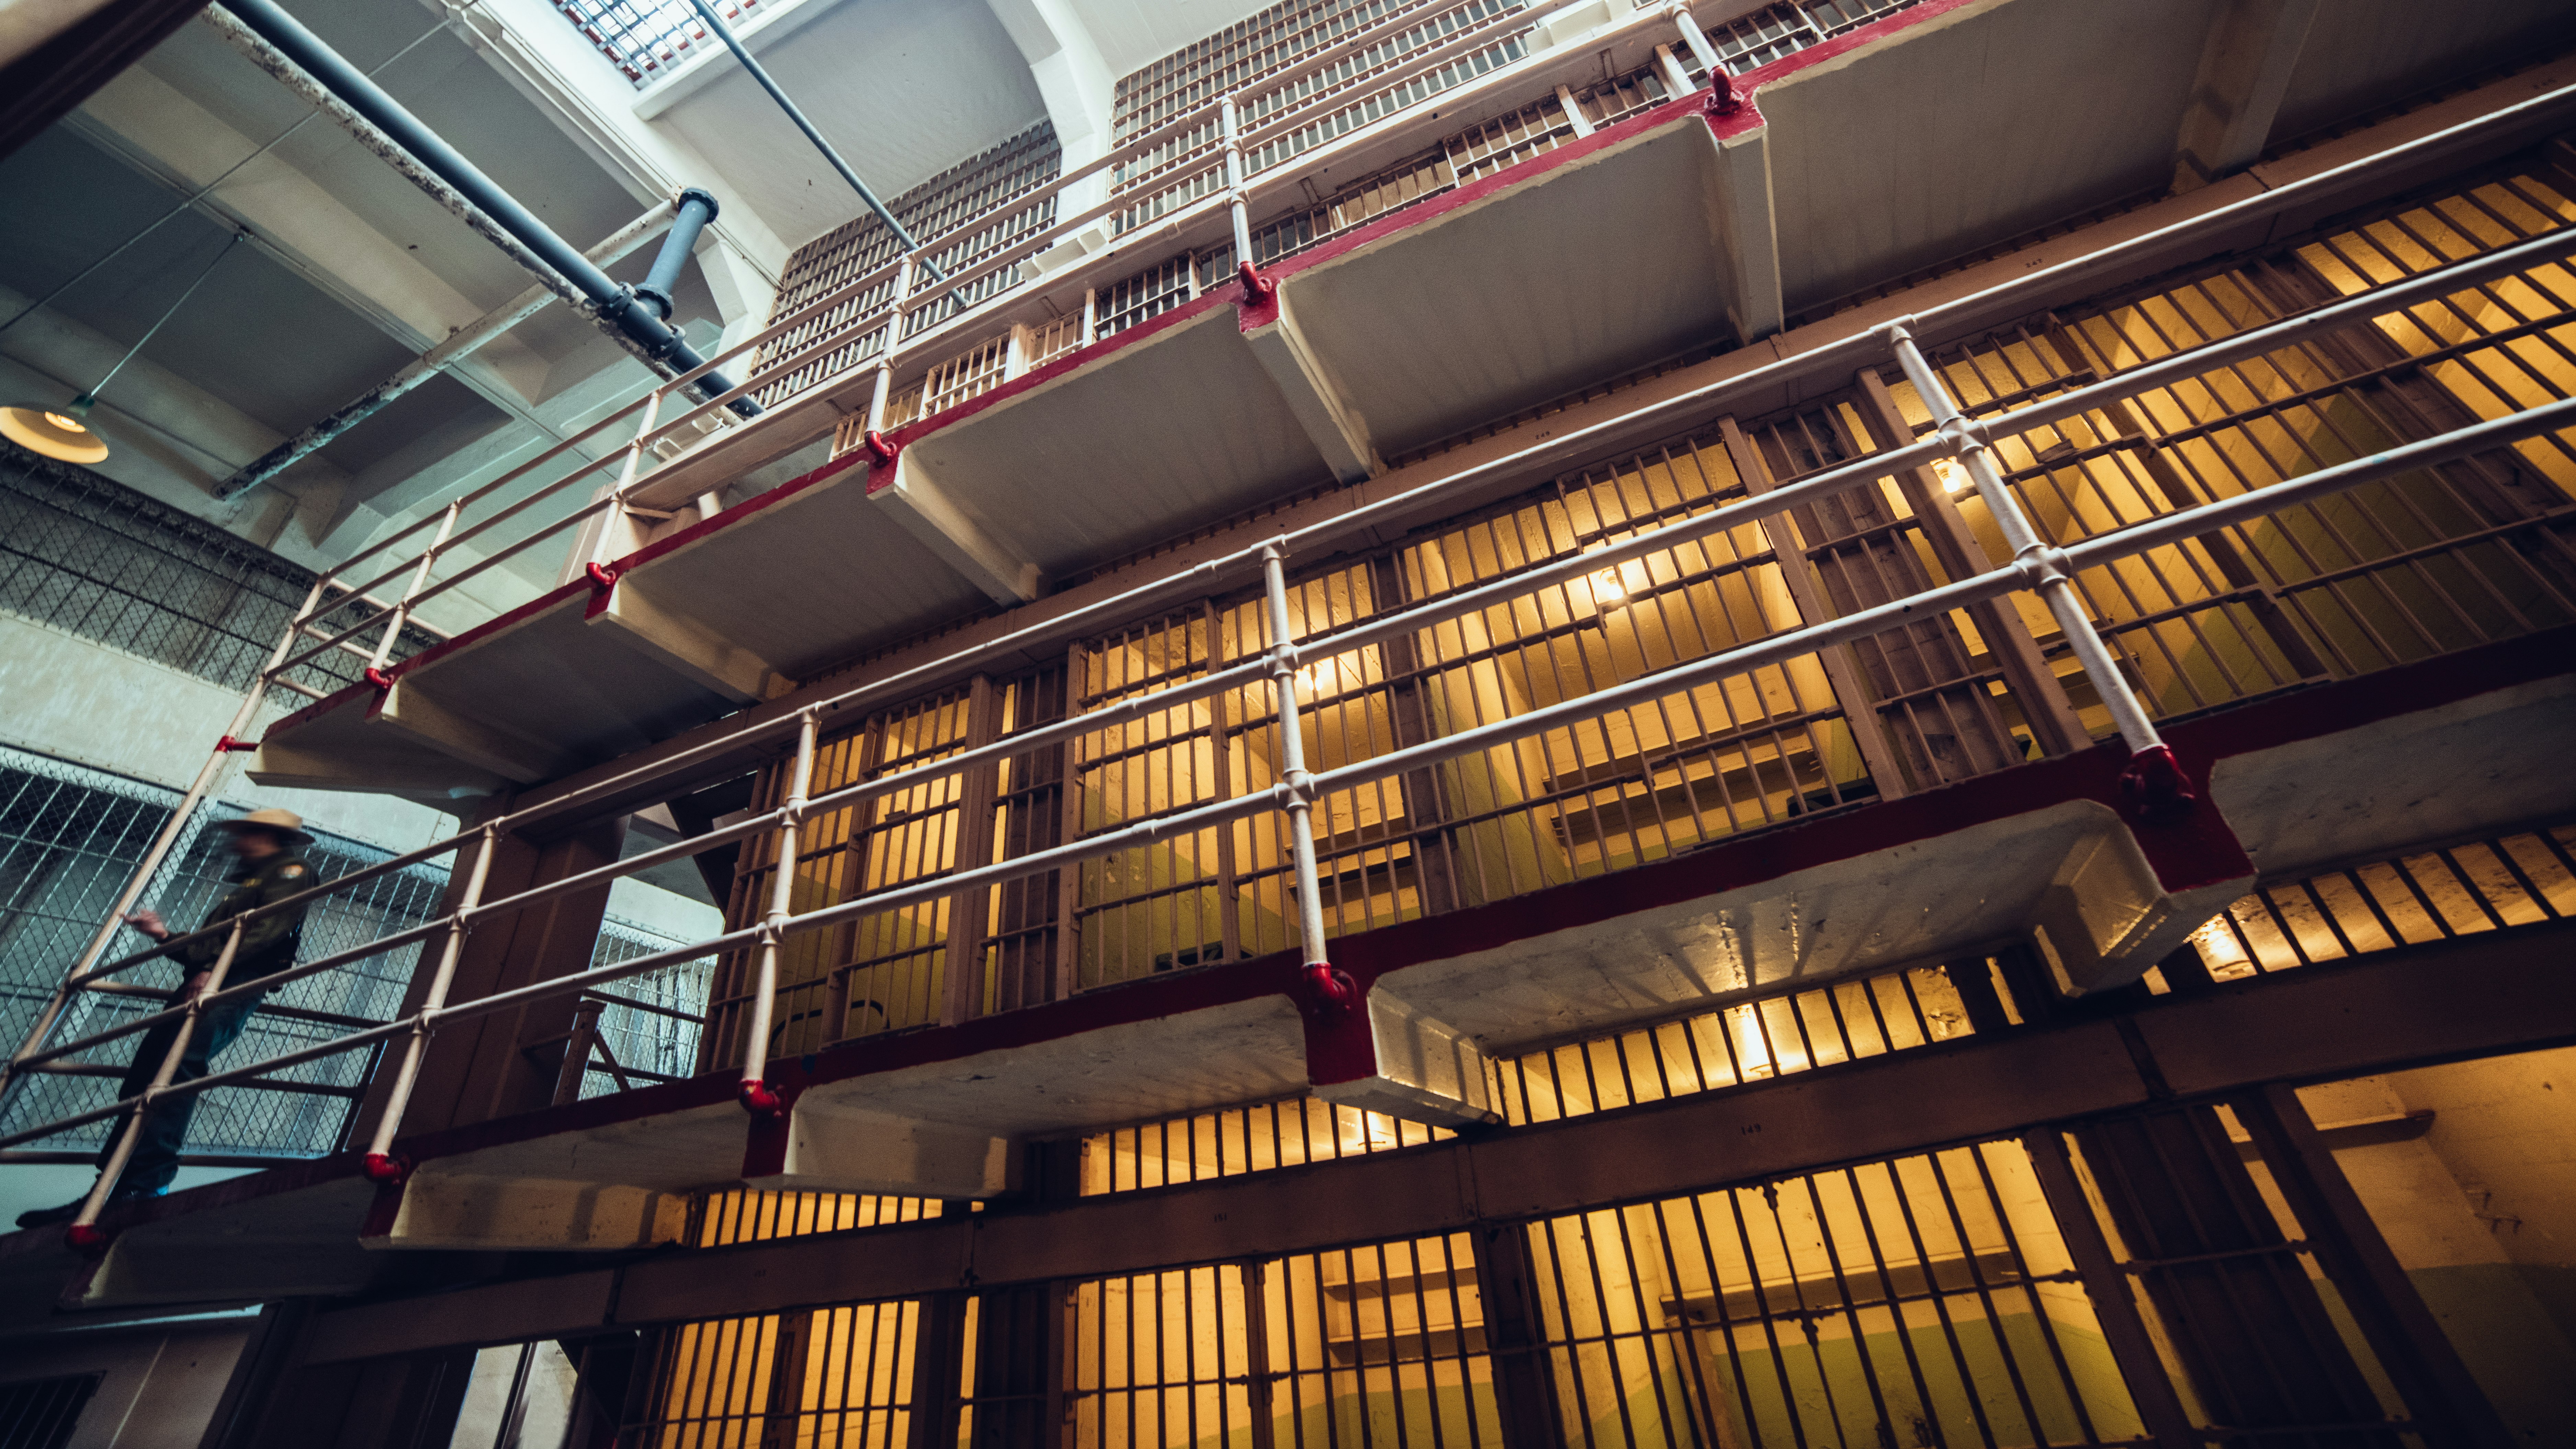 A look inside a large, three-story prison. A guard perches outside the cells on the second level.